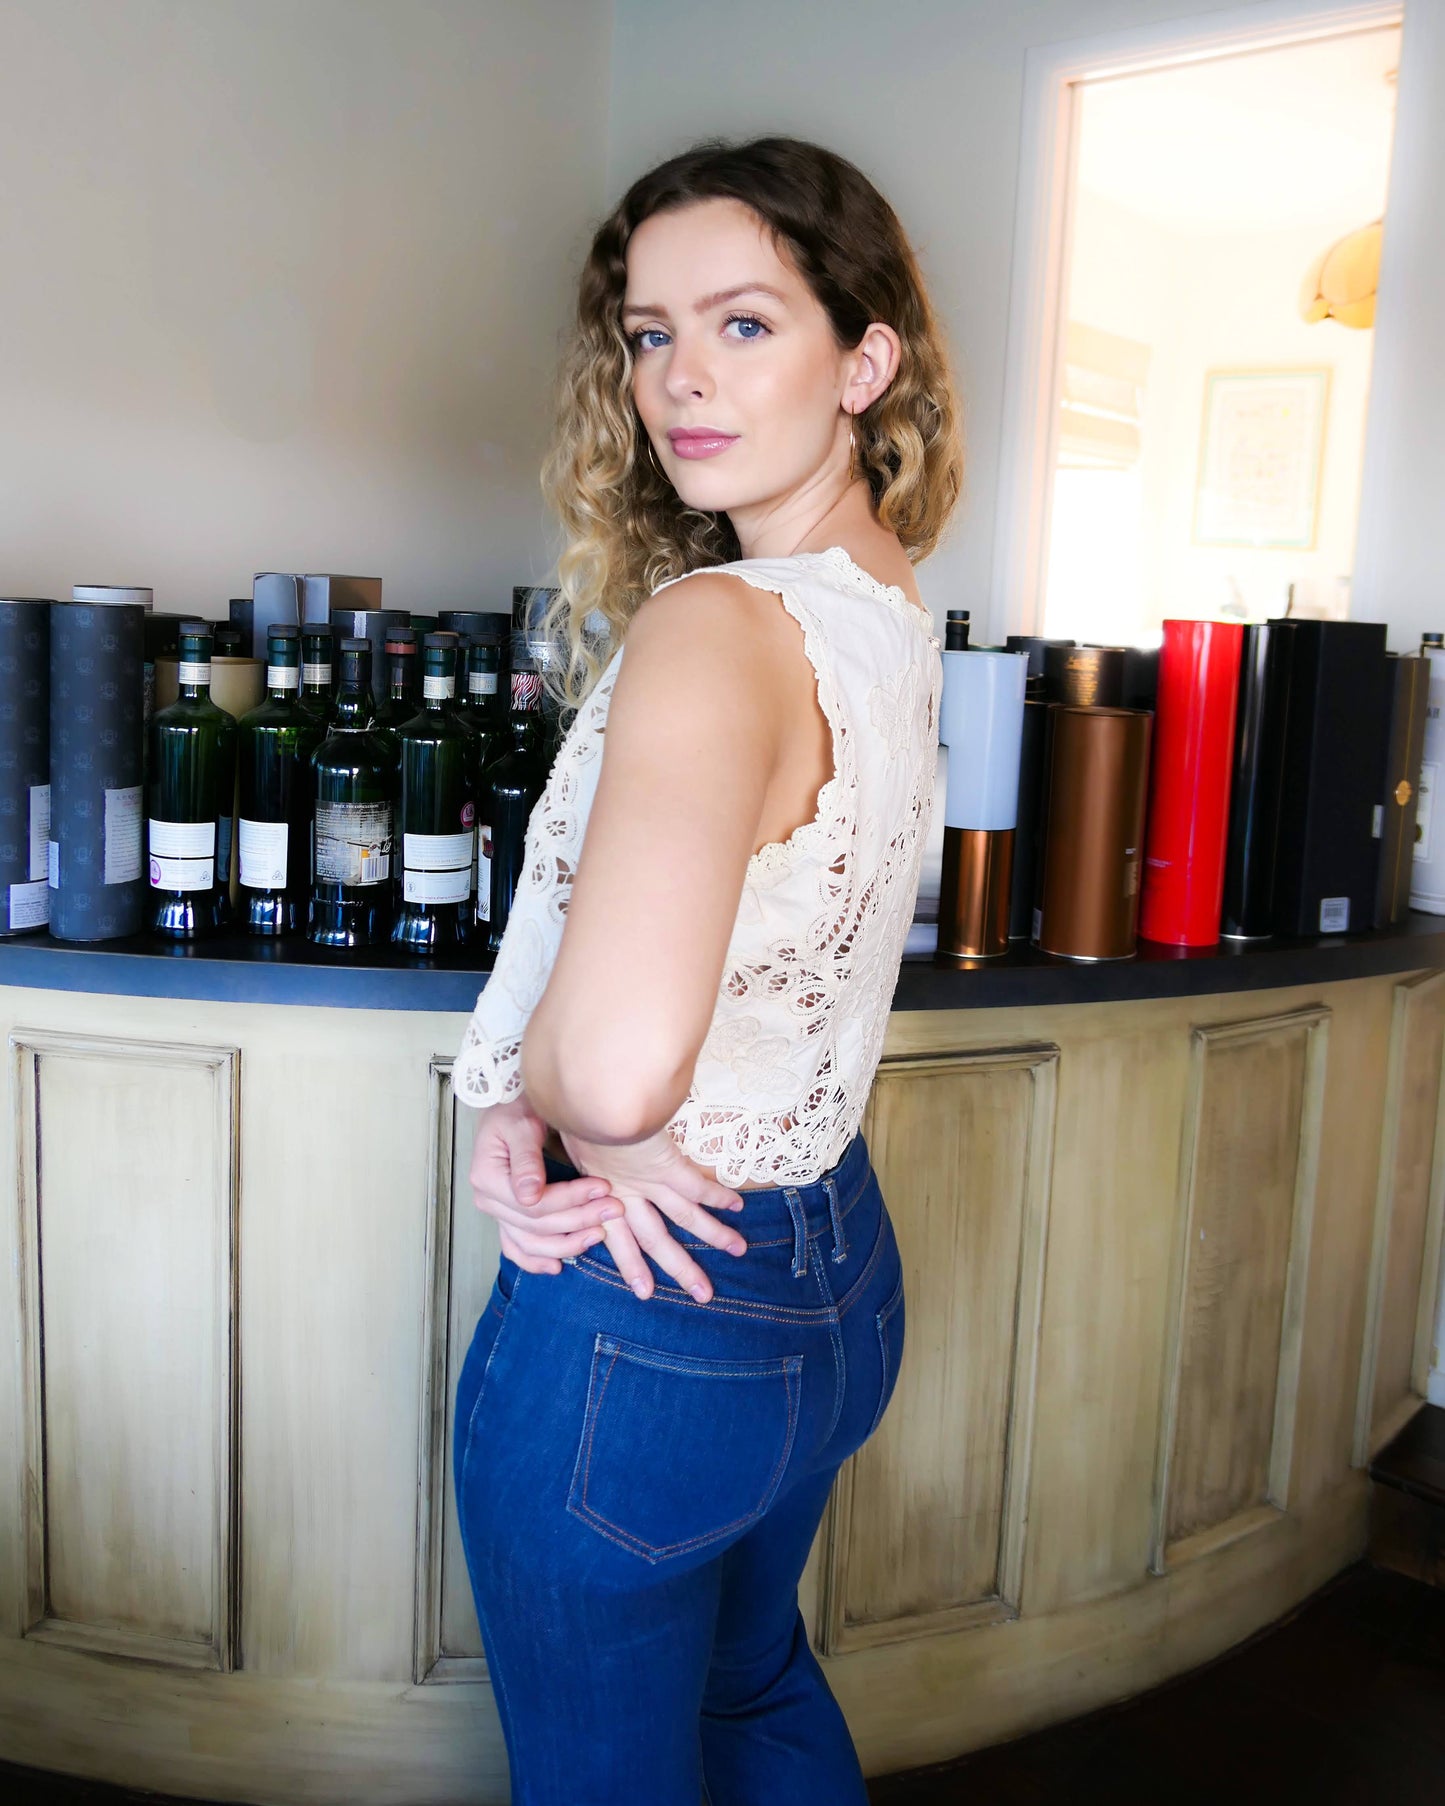 Romantic, boho chic, goes-with-everything crop tank top made with Lim's Vintage embroidered Battenberg lace fabric with a butterfly and floral motif. Goes well with jeans or denim skirt and cowboy boots or sandals.  